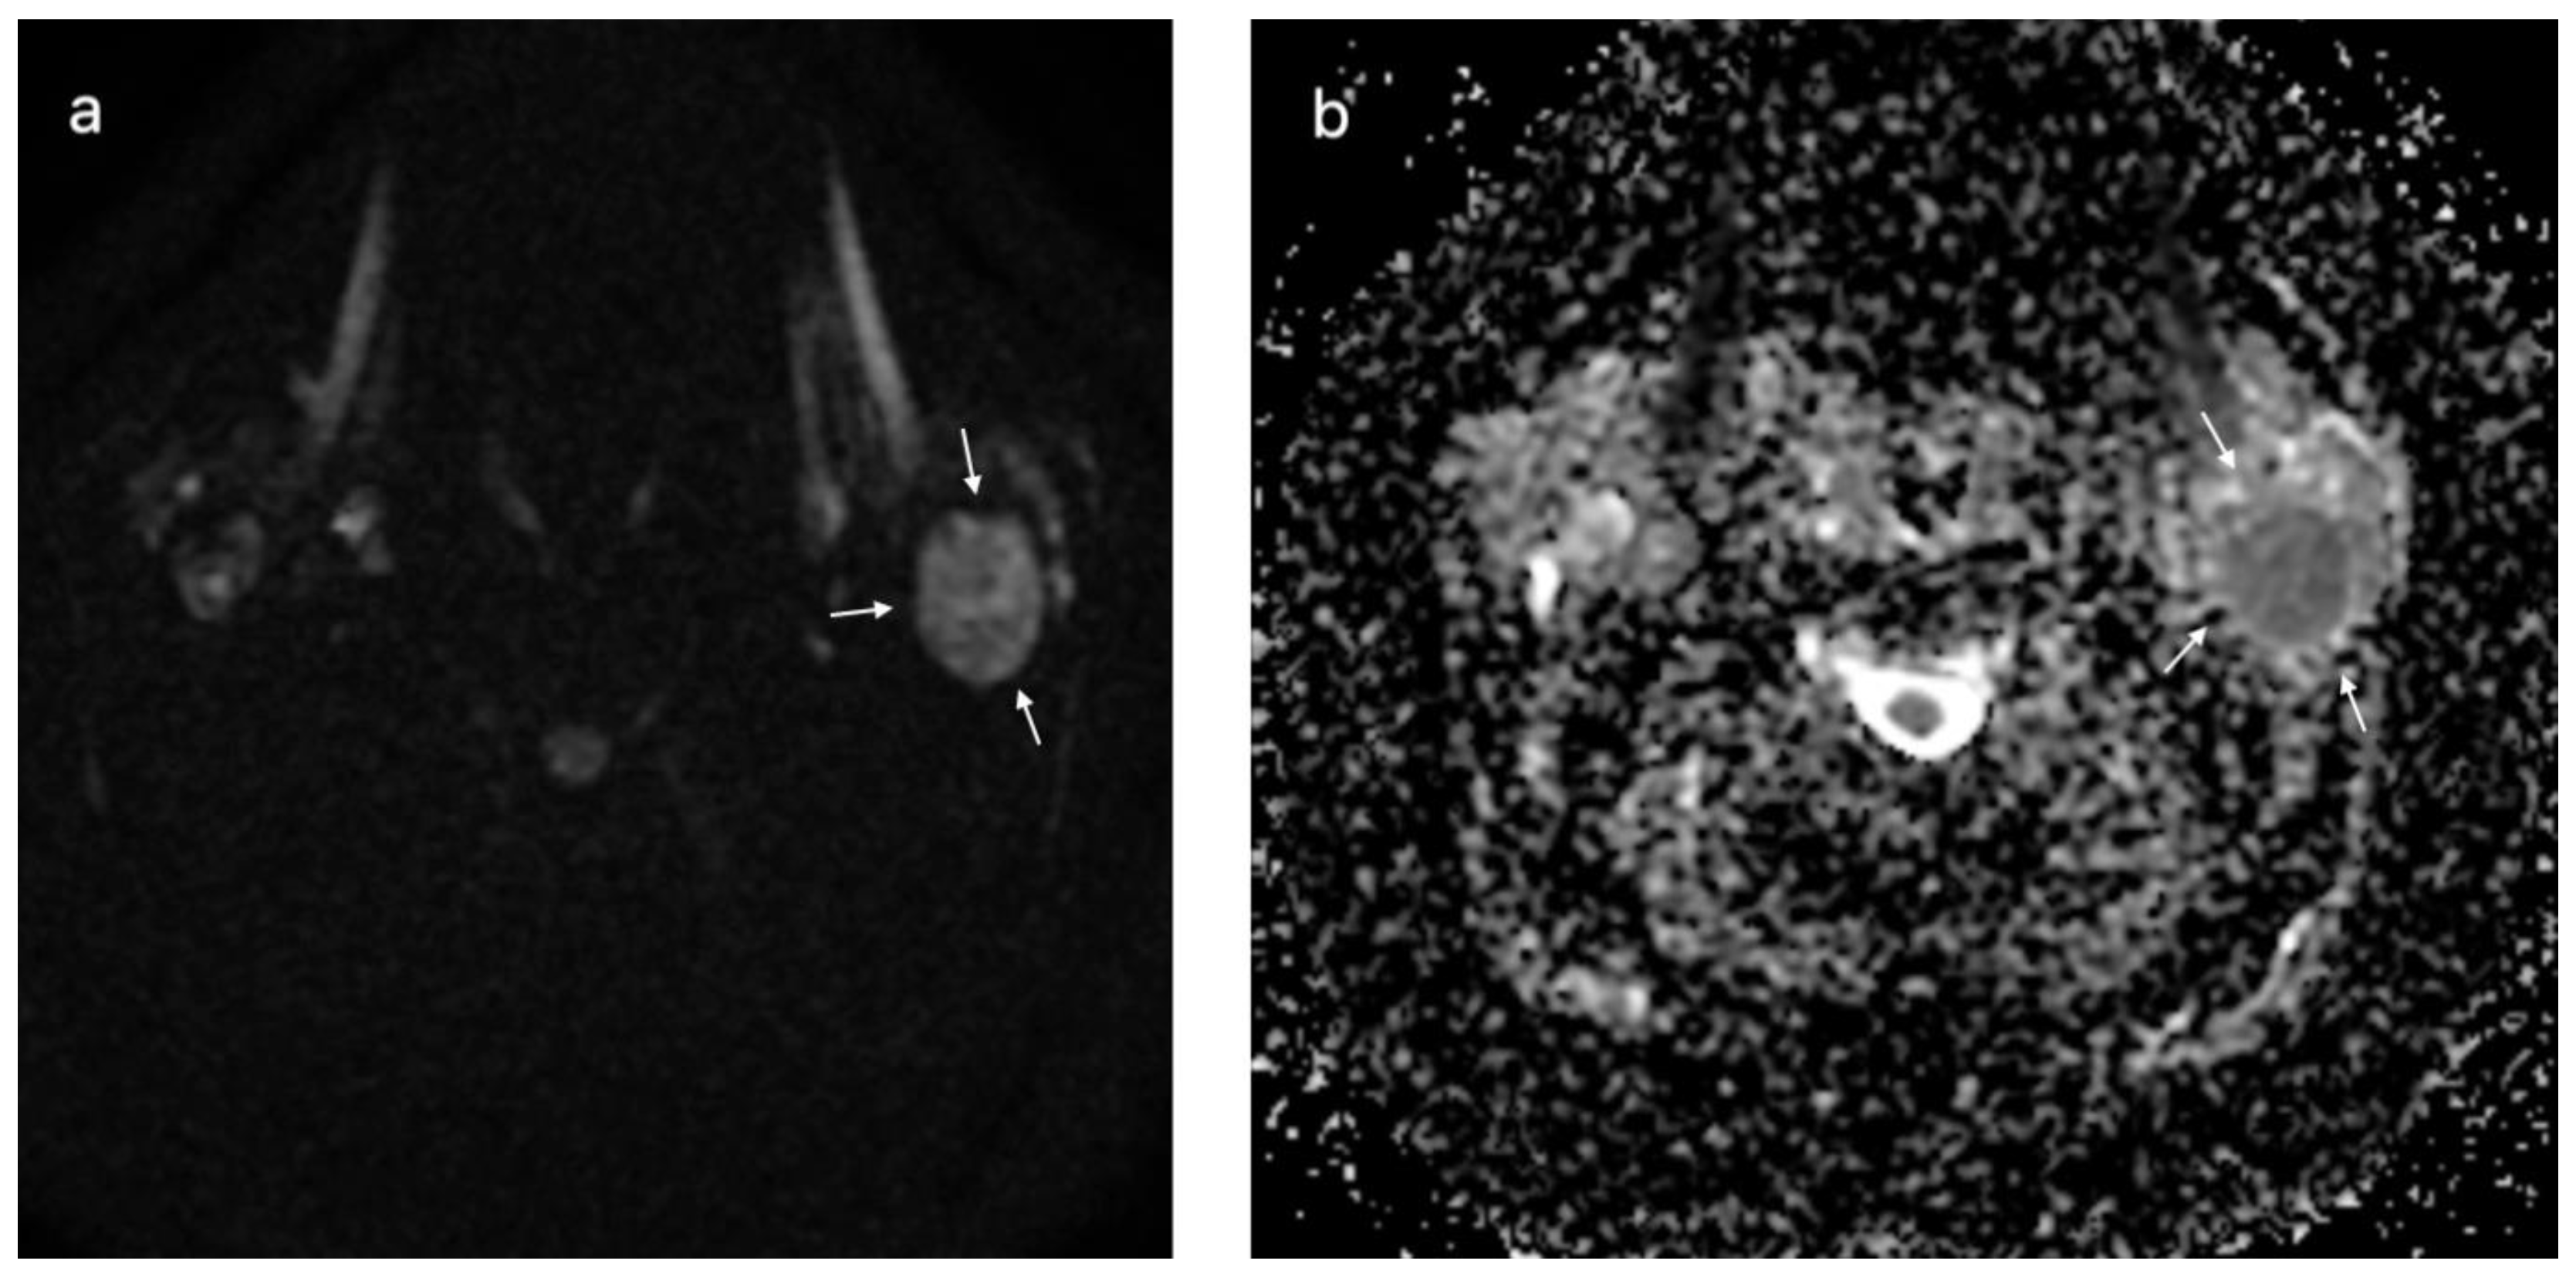 Cureus, Sequelae of a Rare Case of Penetrating Parotid Gland Injury:  Ultrasound and Magnetic Resonance Imaging Features